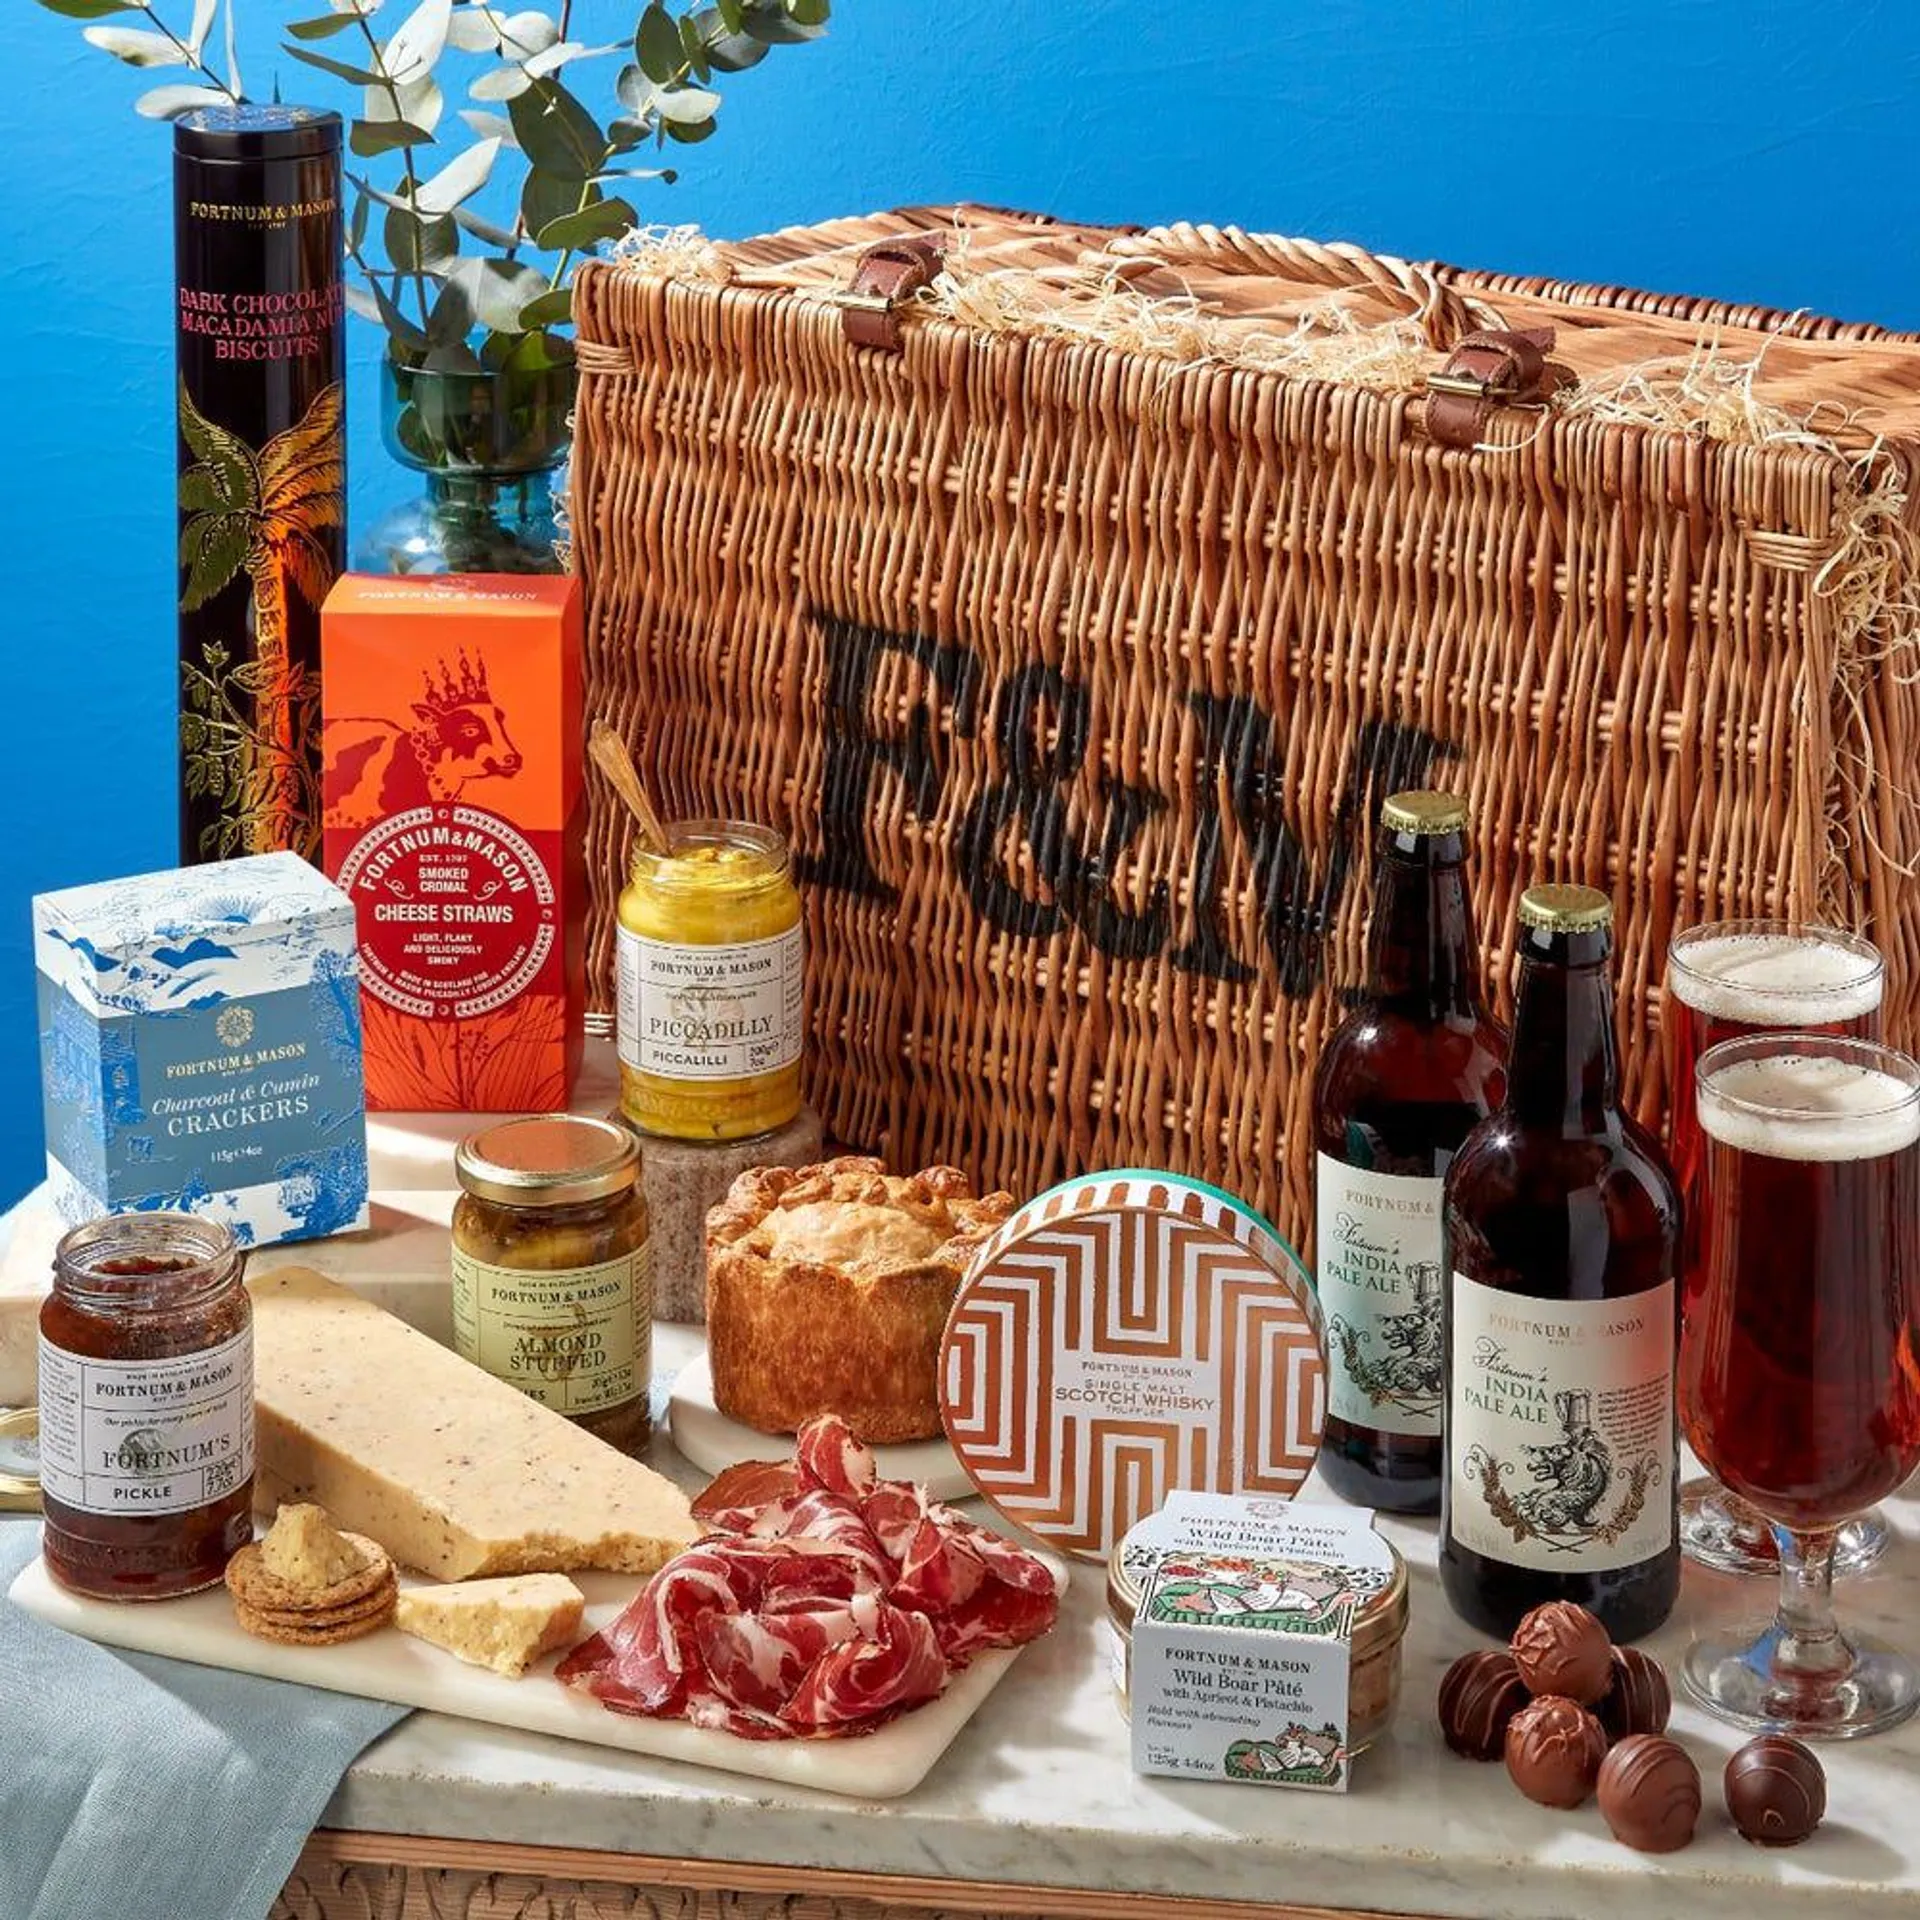 The Father’s Day Feast Hamper